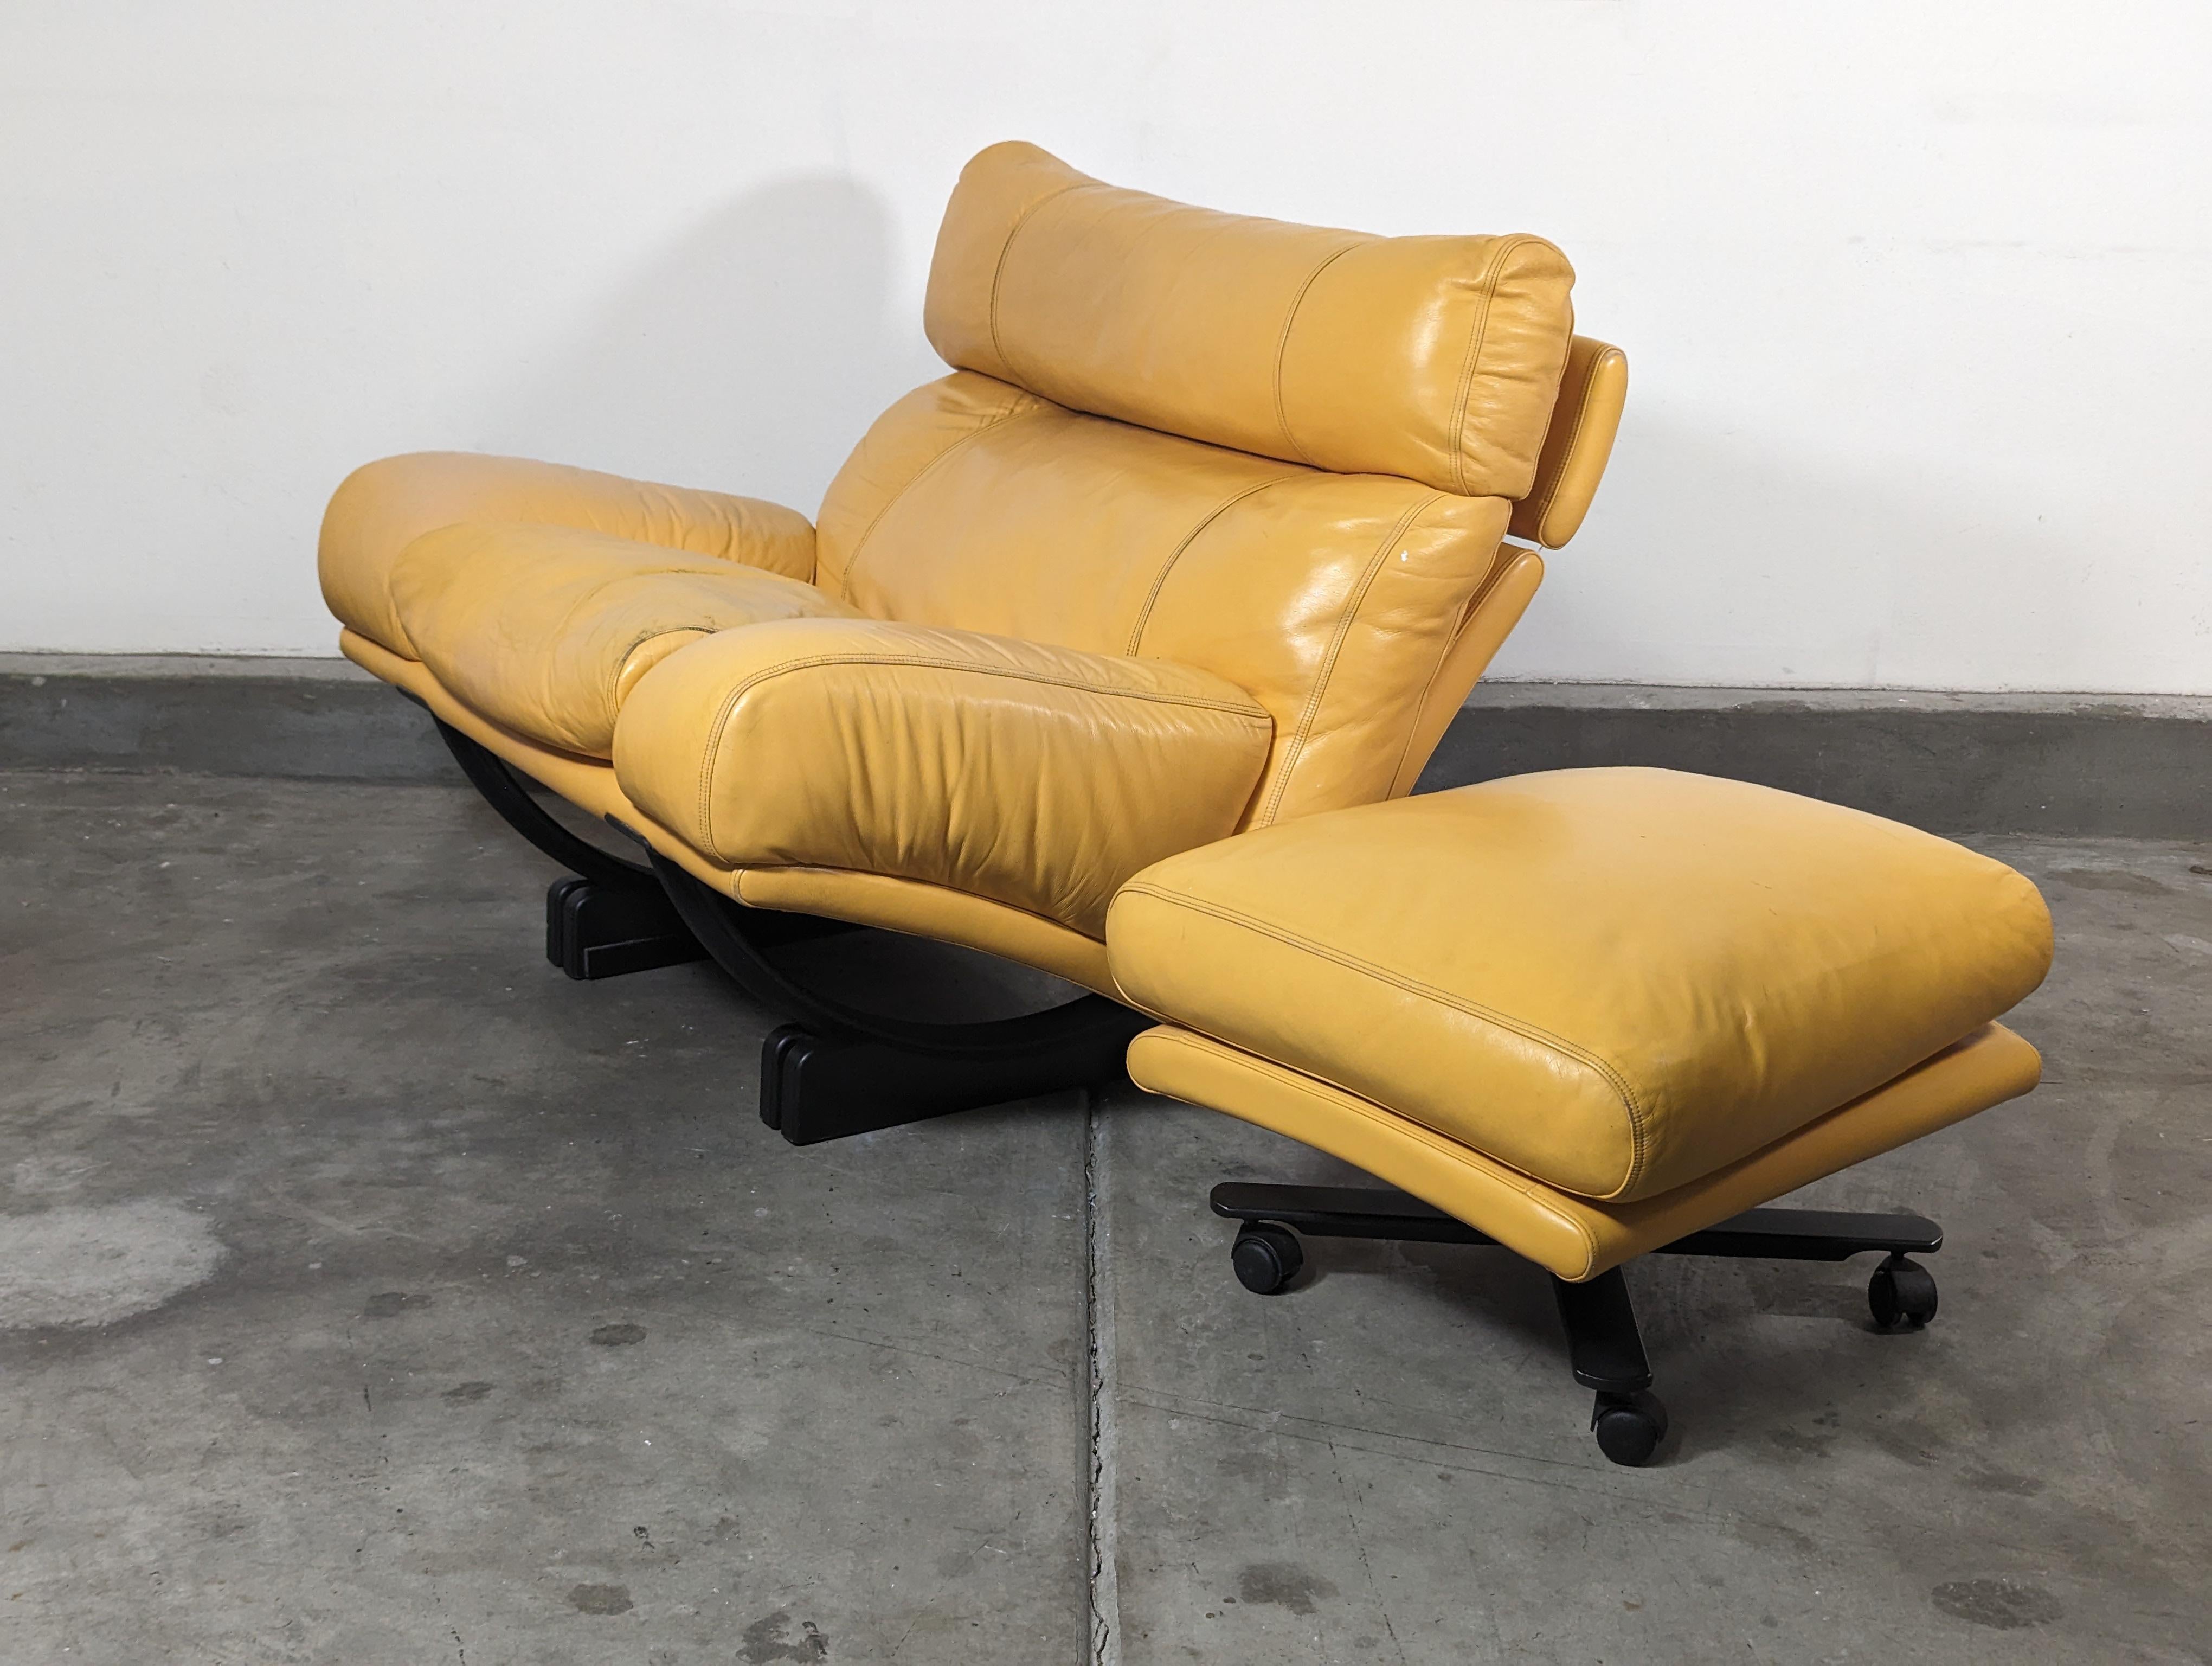 Late 20th Century Postmodern Walse Leather Lounge Chair by Tito Agnoli for Poltrona Frau, c1990s For Sale